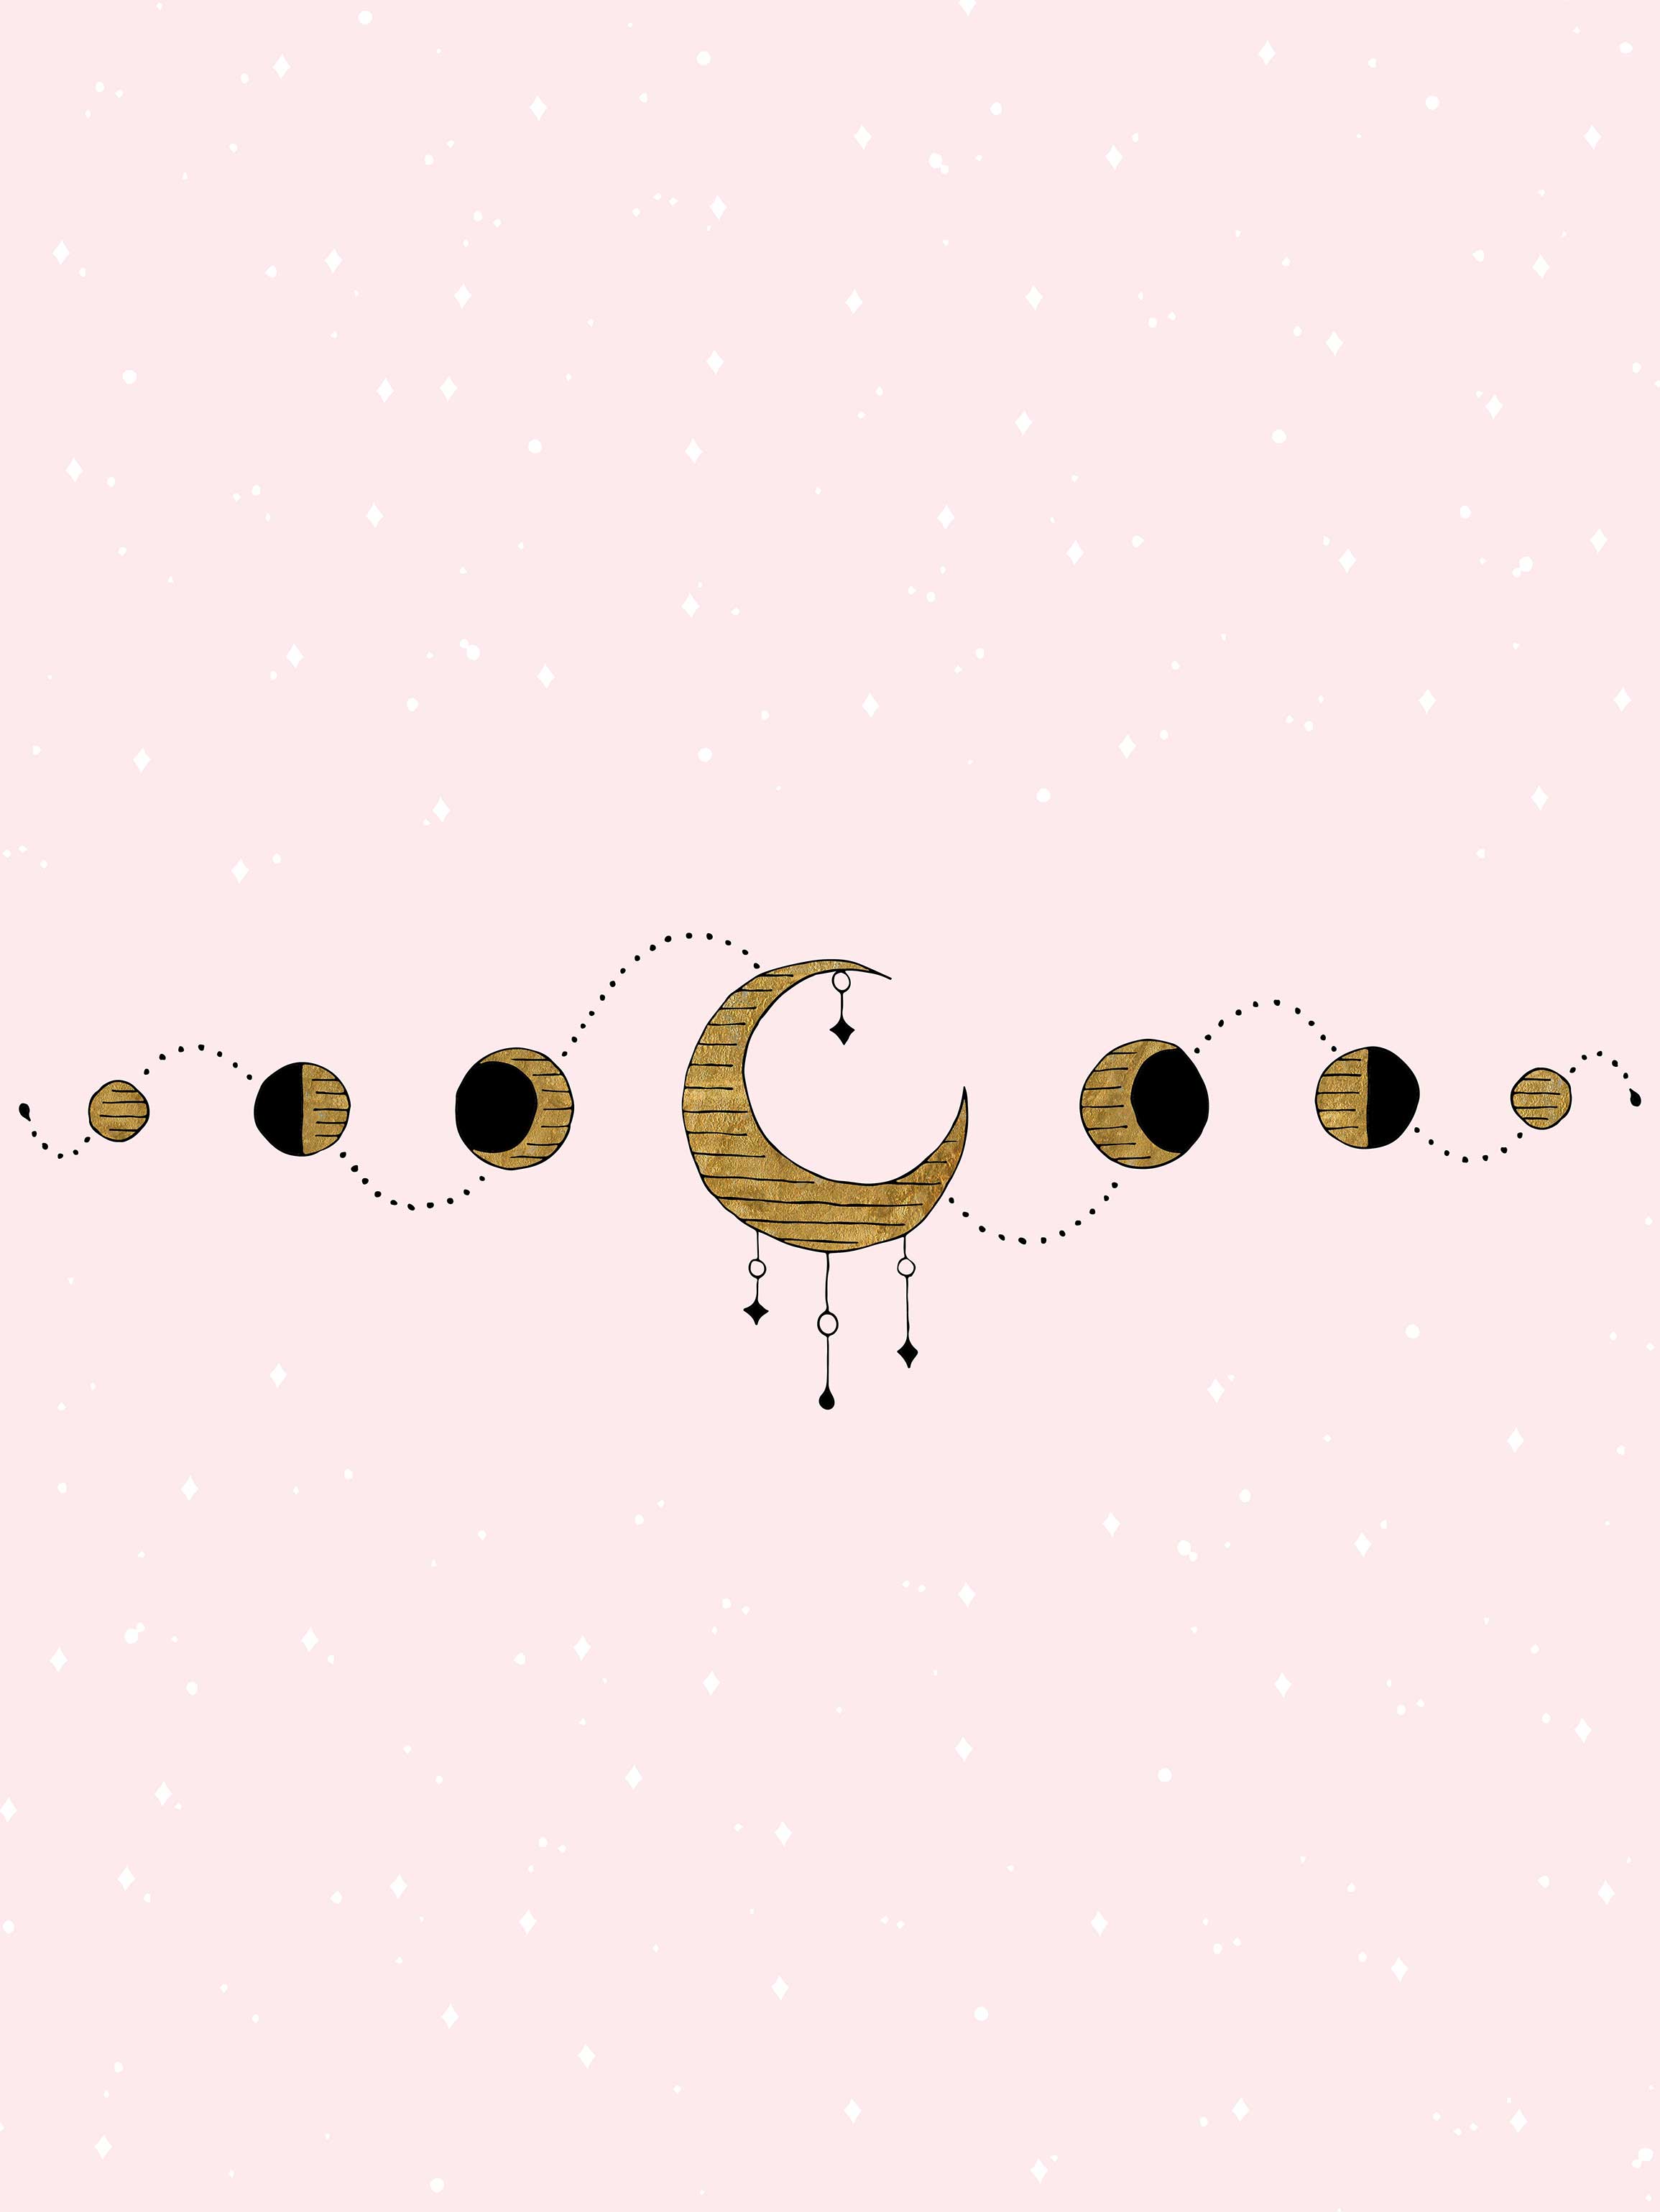 Phases of the Moon Wall Art 2310x3079